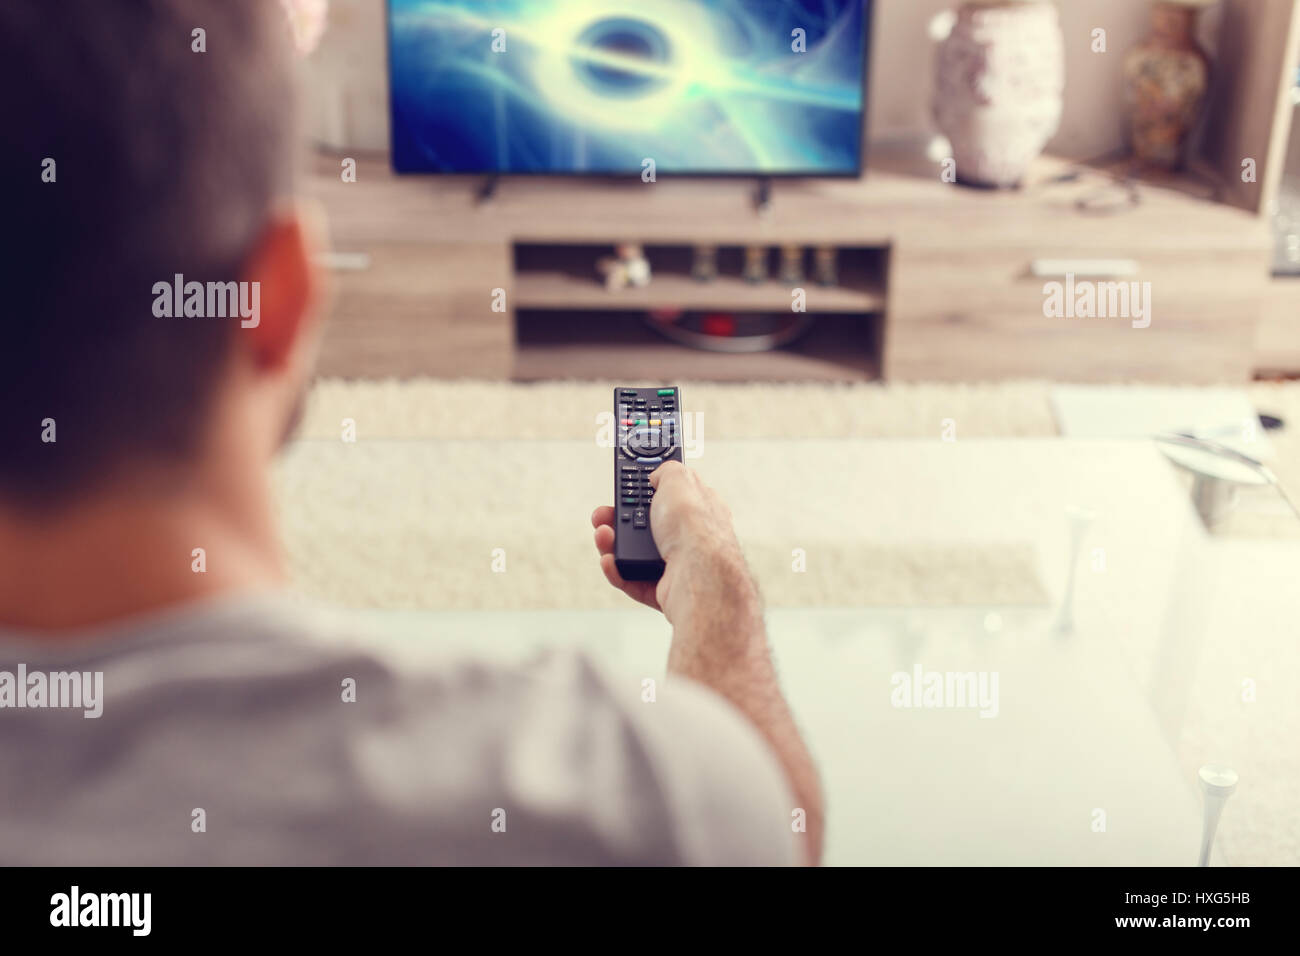 Man with remote control watching sci-fi at home in TV Stock Photo